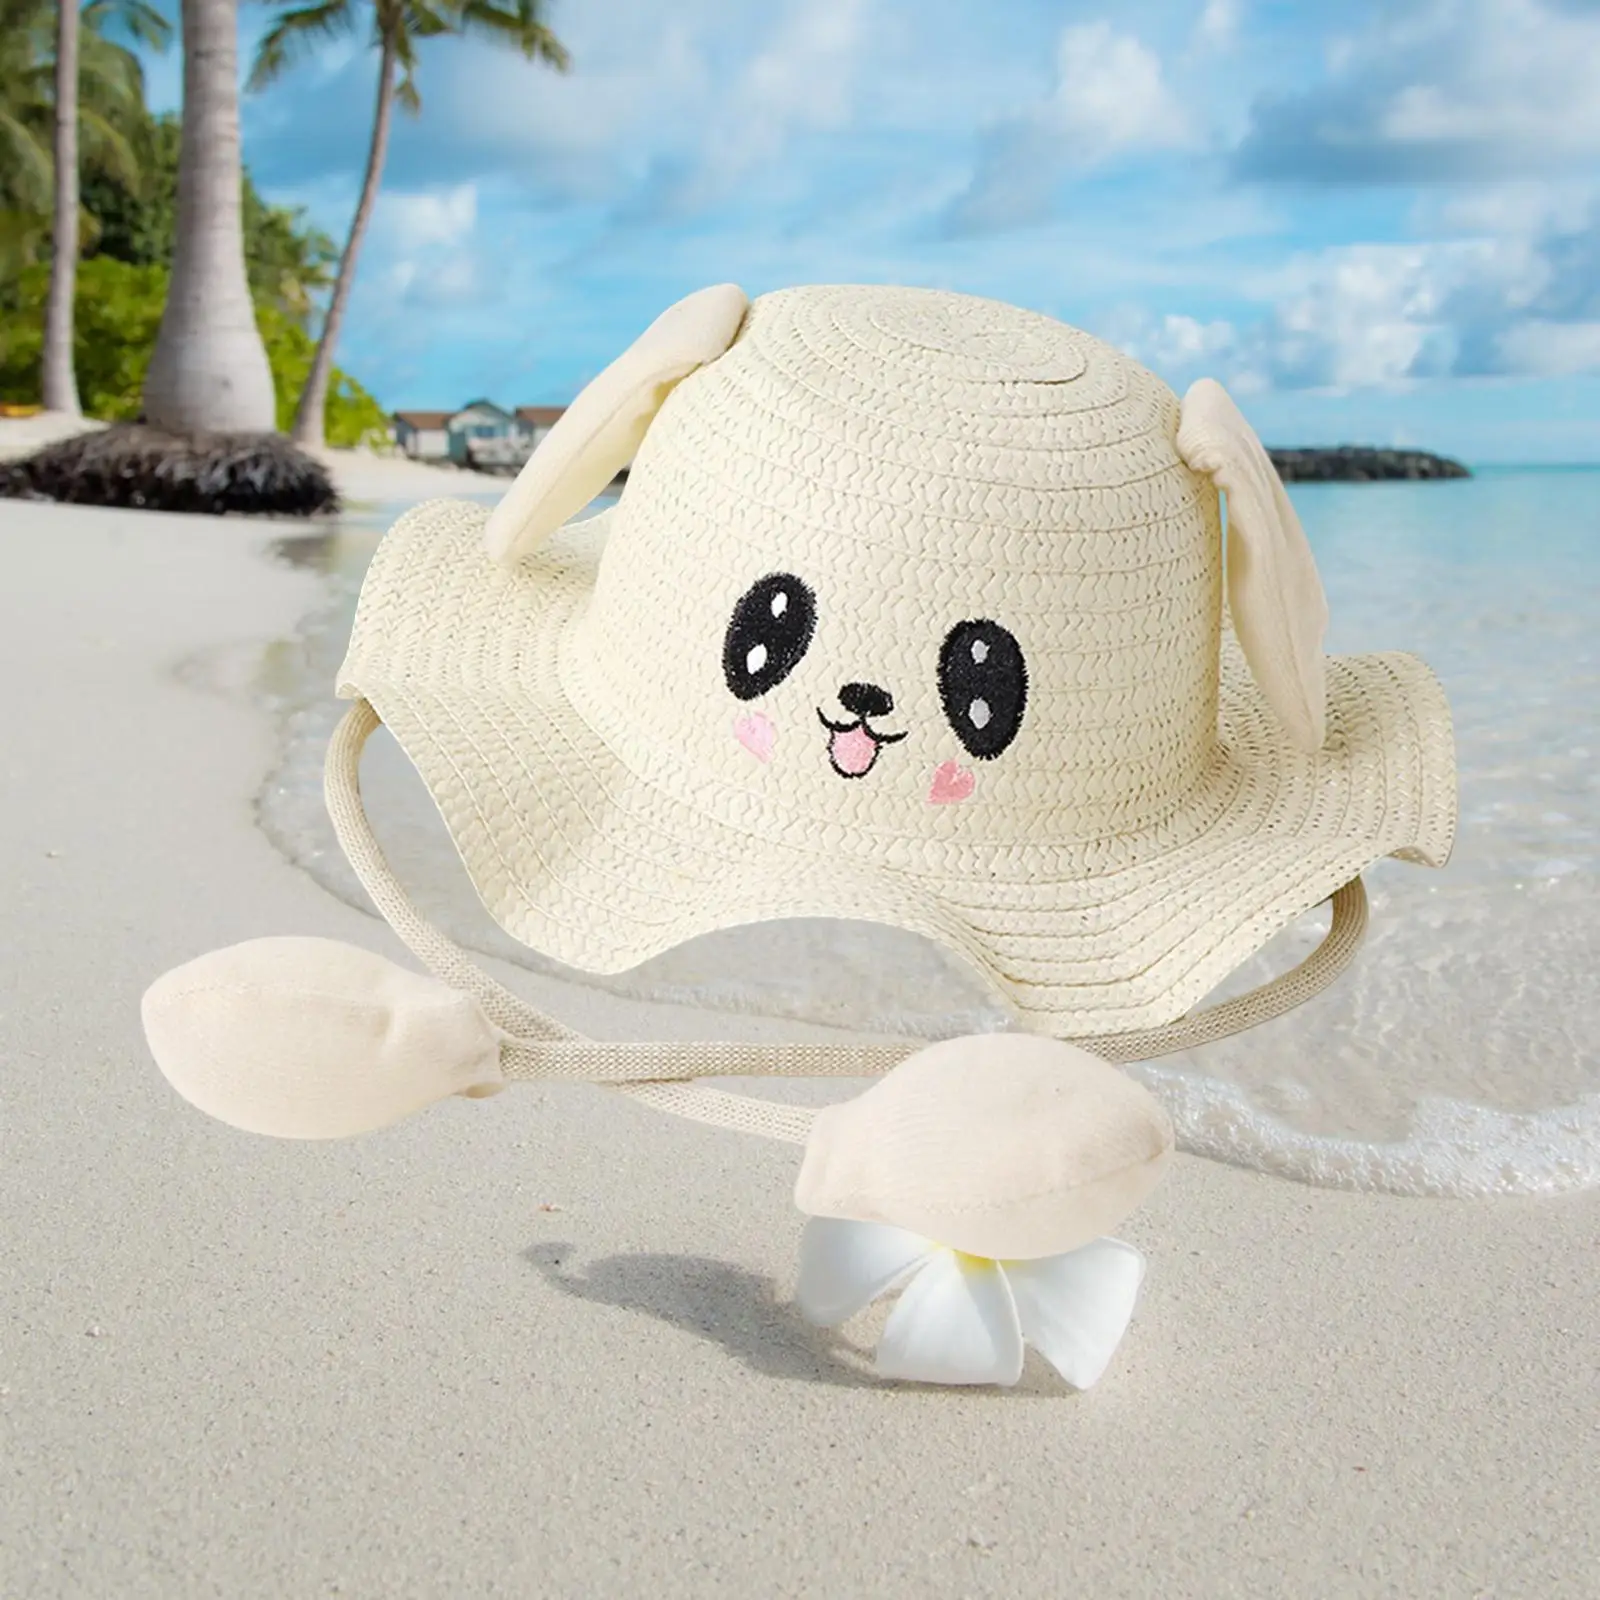 Rabbit Ear Straw Hat Sun Hat with Ears Moving Jumping Beach Hat Fisherman Cap for Beach Dress Costume Accessories Gift